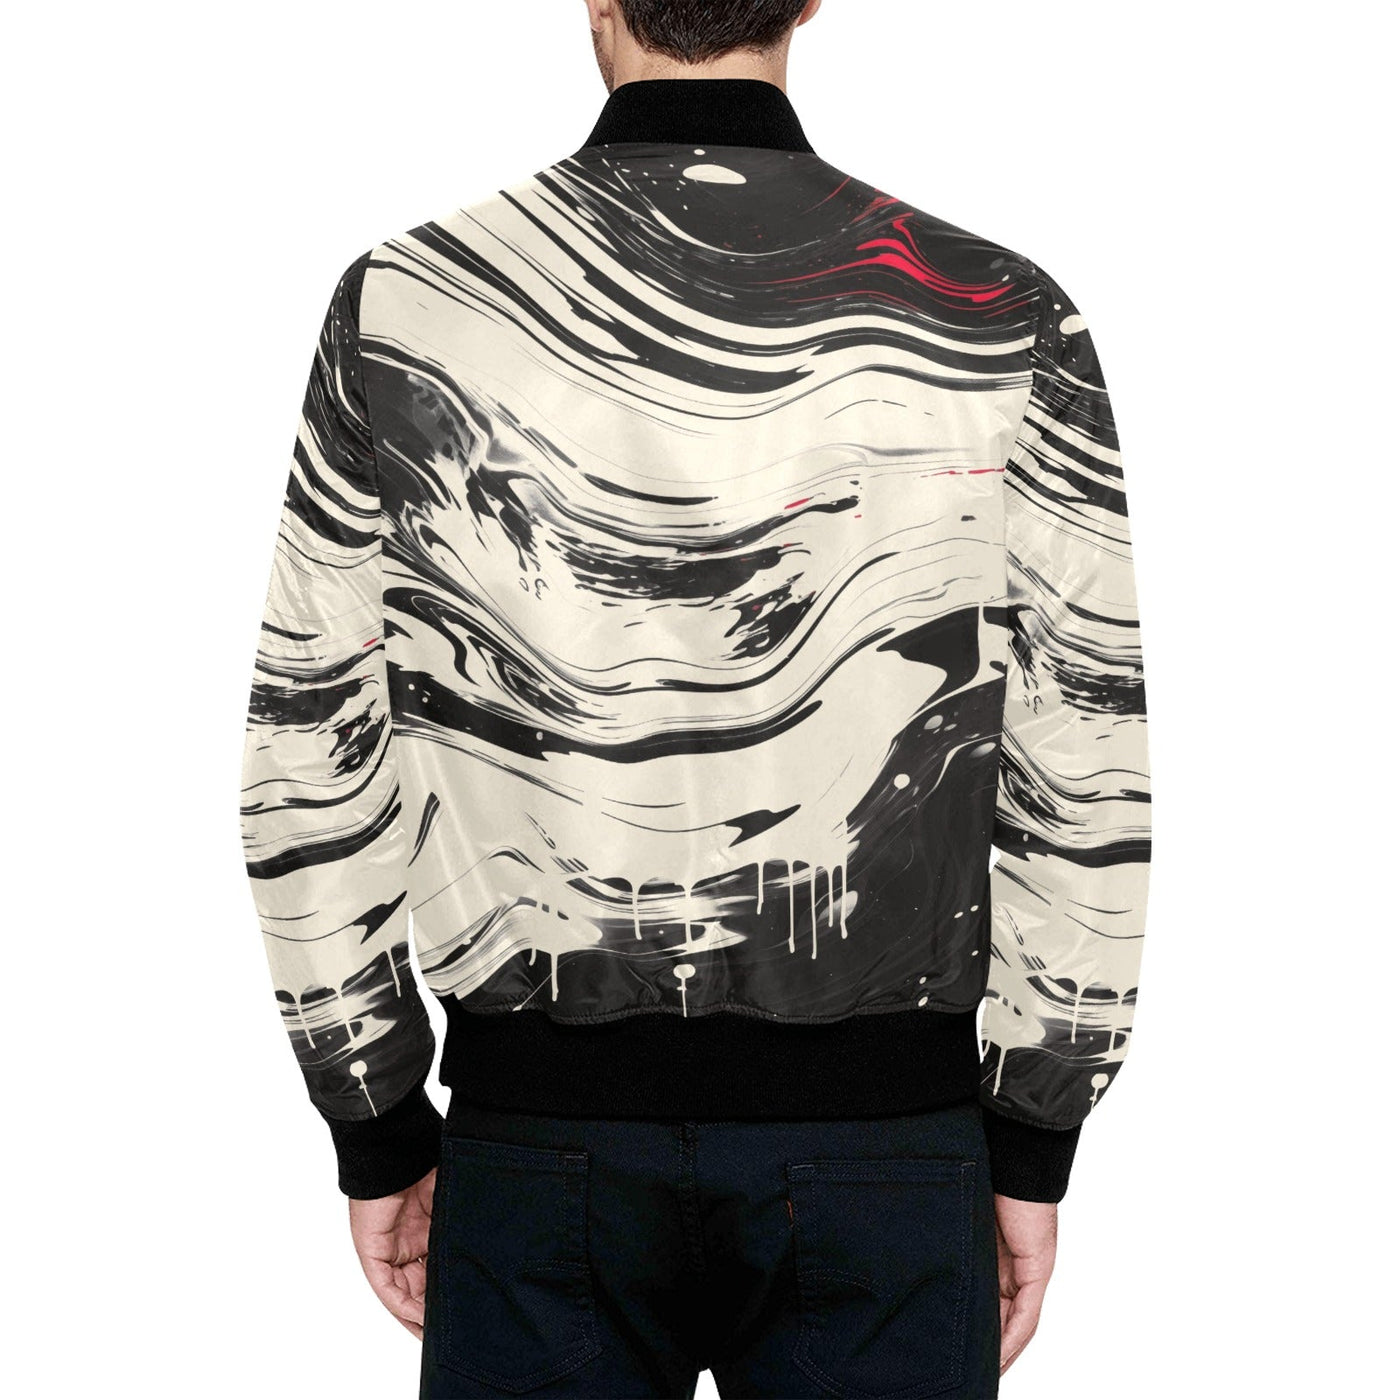 Japanese Abstract Paint Trail Fashion Hoodie Quilted Bomber Jacket